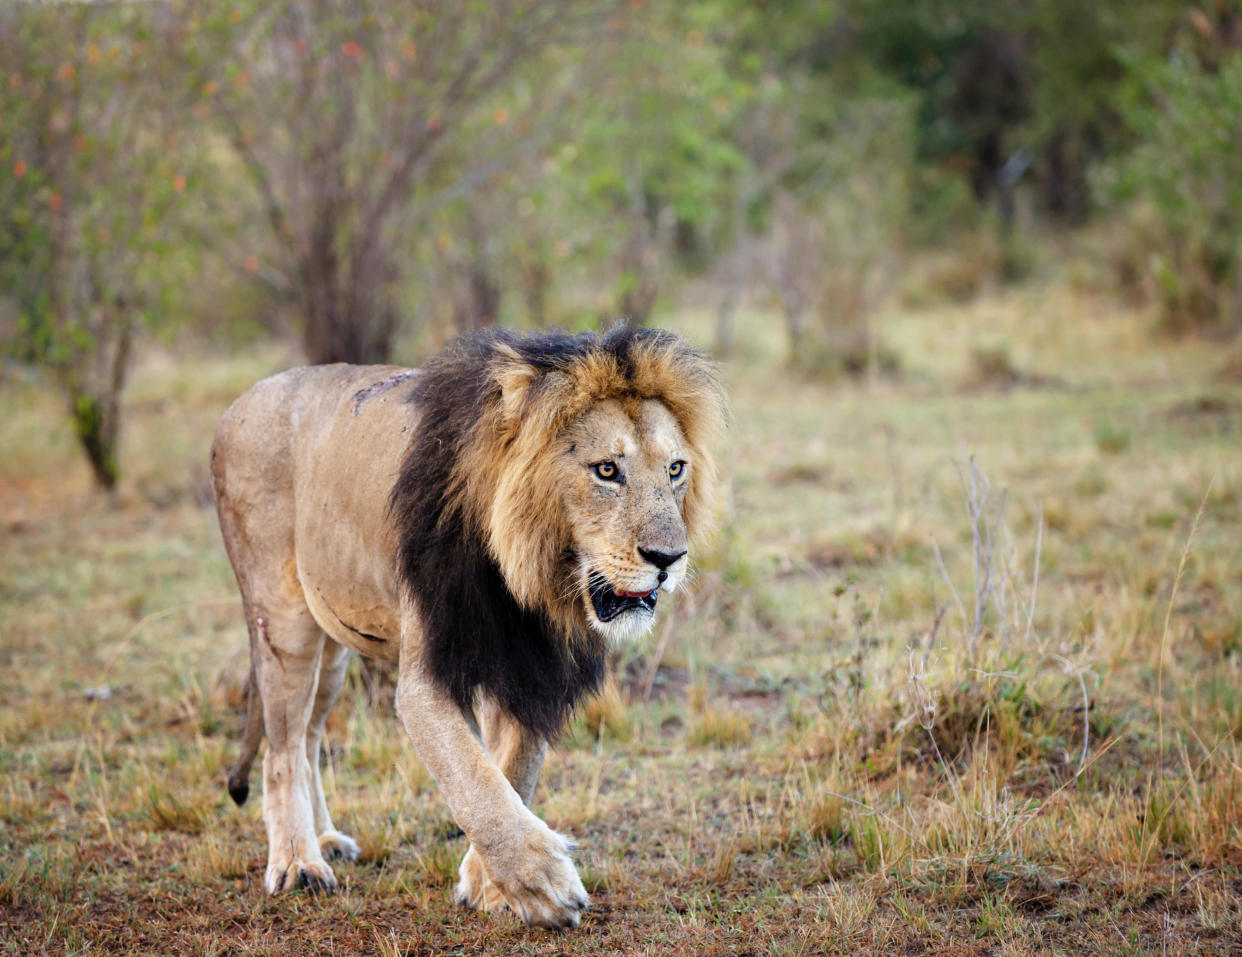 A worker was killed by a lion, similar to the one pictured, at a North Carolina wildlife preserve during an enclosure cleaning, the facility said. (Photo: Vicki Jauron, Babylon and Beyond Photography via Getty Images)